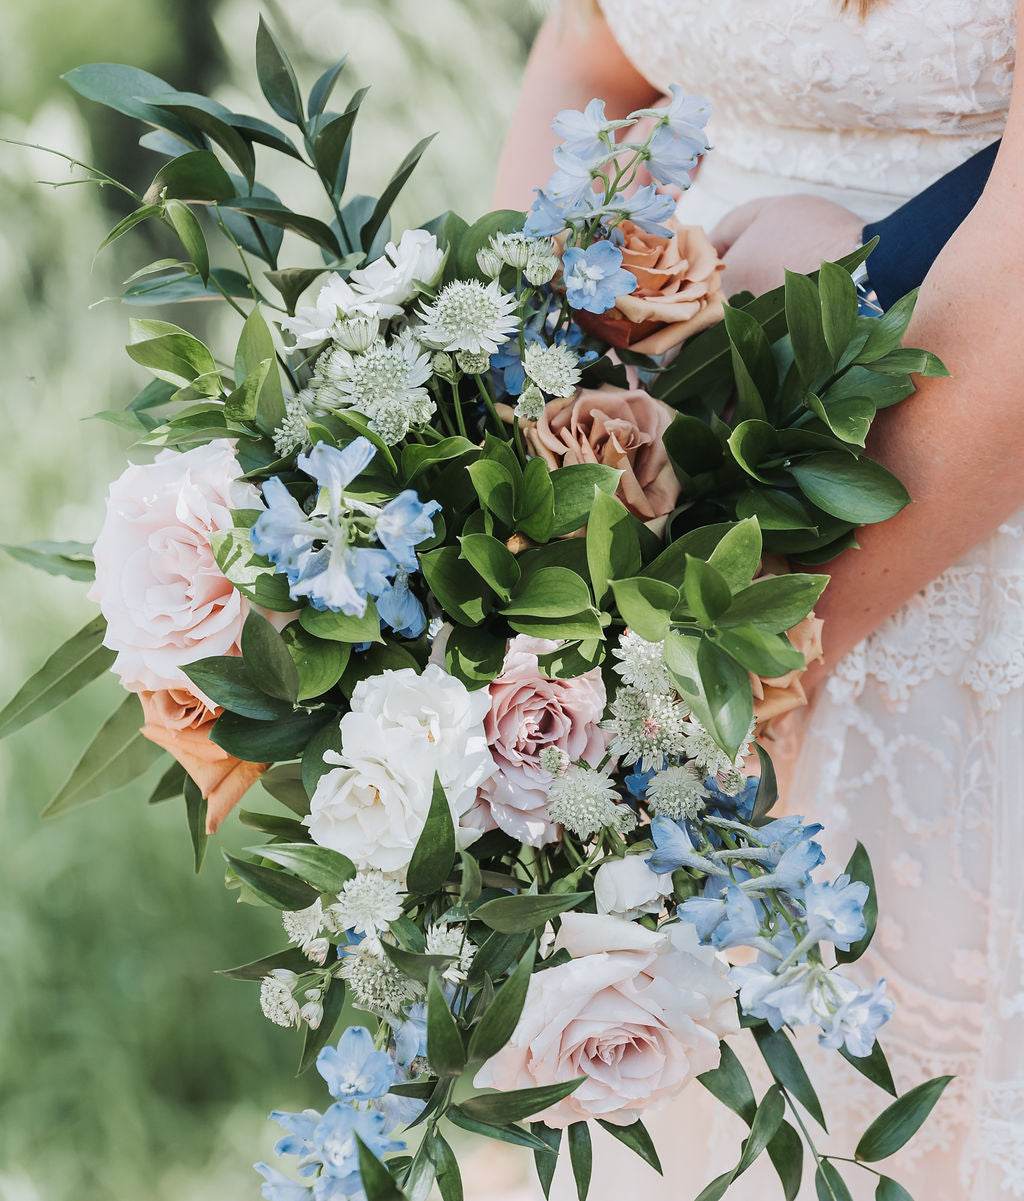 Bridal bouquet with blue and white flowers